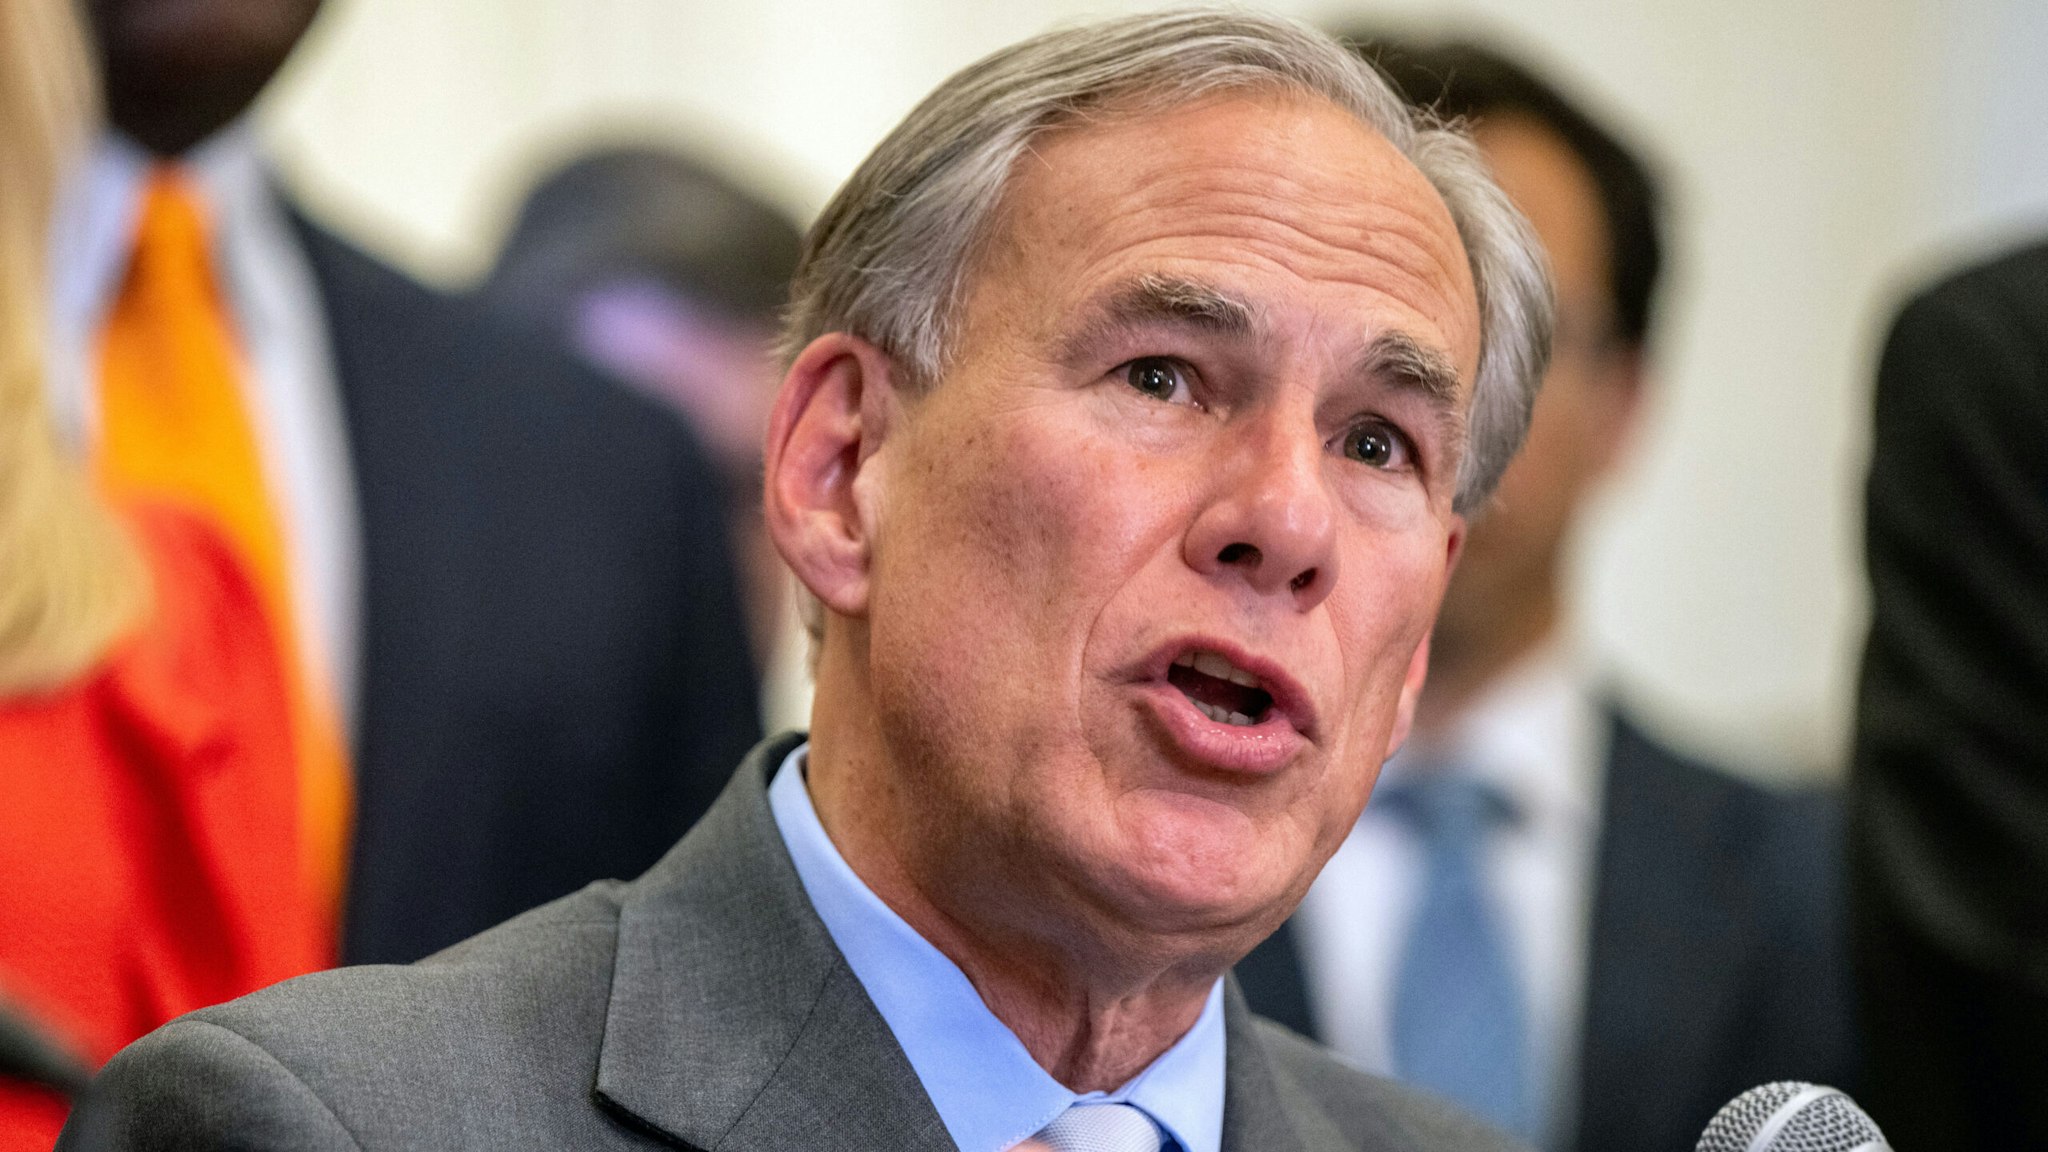 AUSTIN, TEXAS - MARCH 15: Texas Gov. Greg Abbott speaks during a news conference on March 15, 2023 in Austin, Texas. Gov. Abbott and state officials attended a news conference where they discussed the proposed Texas Helpful Incentives to Produce Semiconductors (CHIPS) Act legislation.